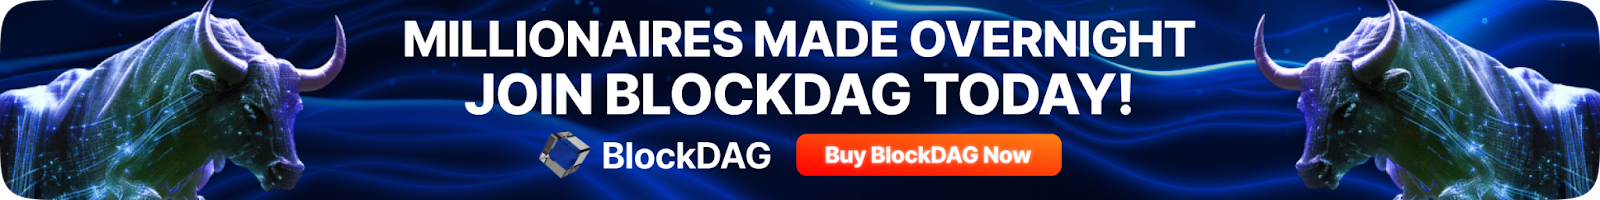 MILLIONAIRES MADE OVERNIGHT JOIN BLOCKDAG TODAY AD BANNER